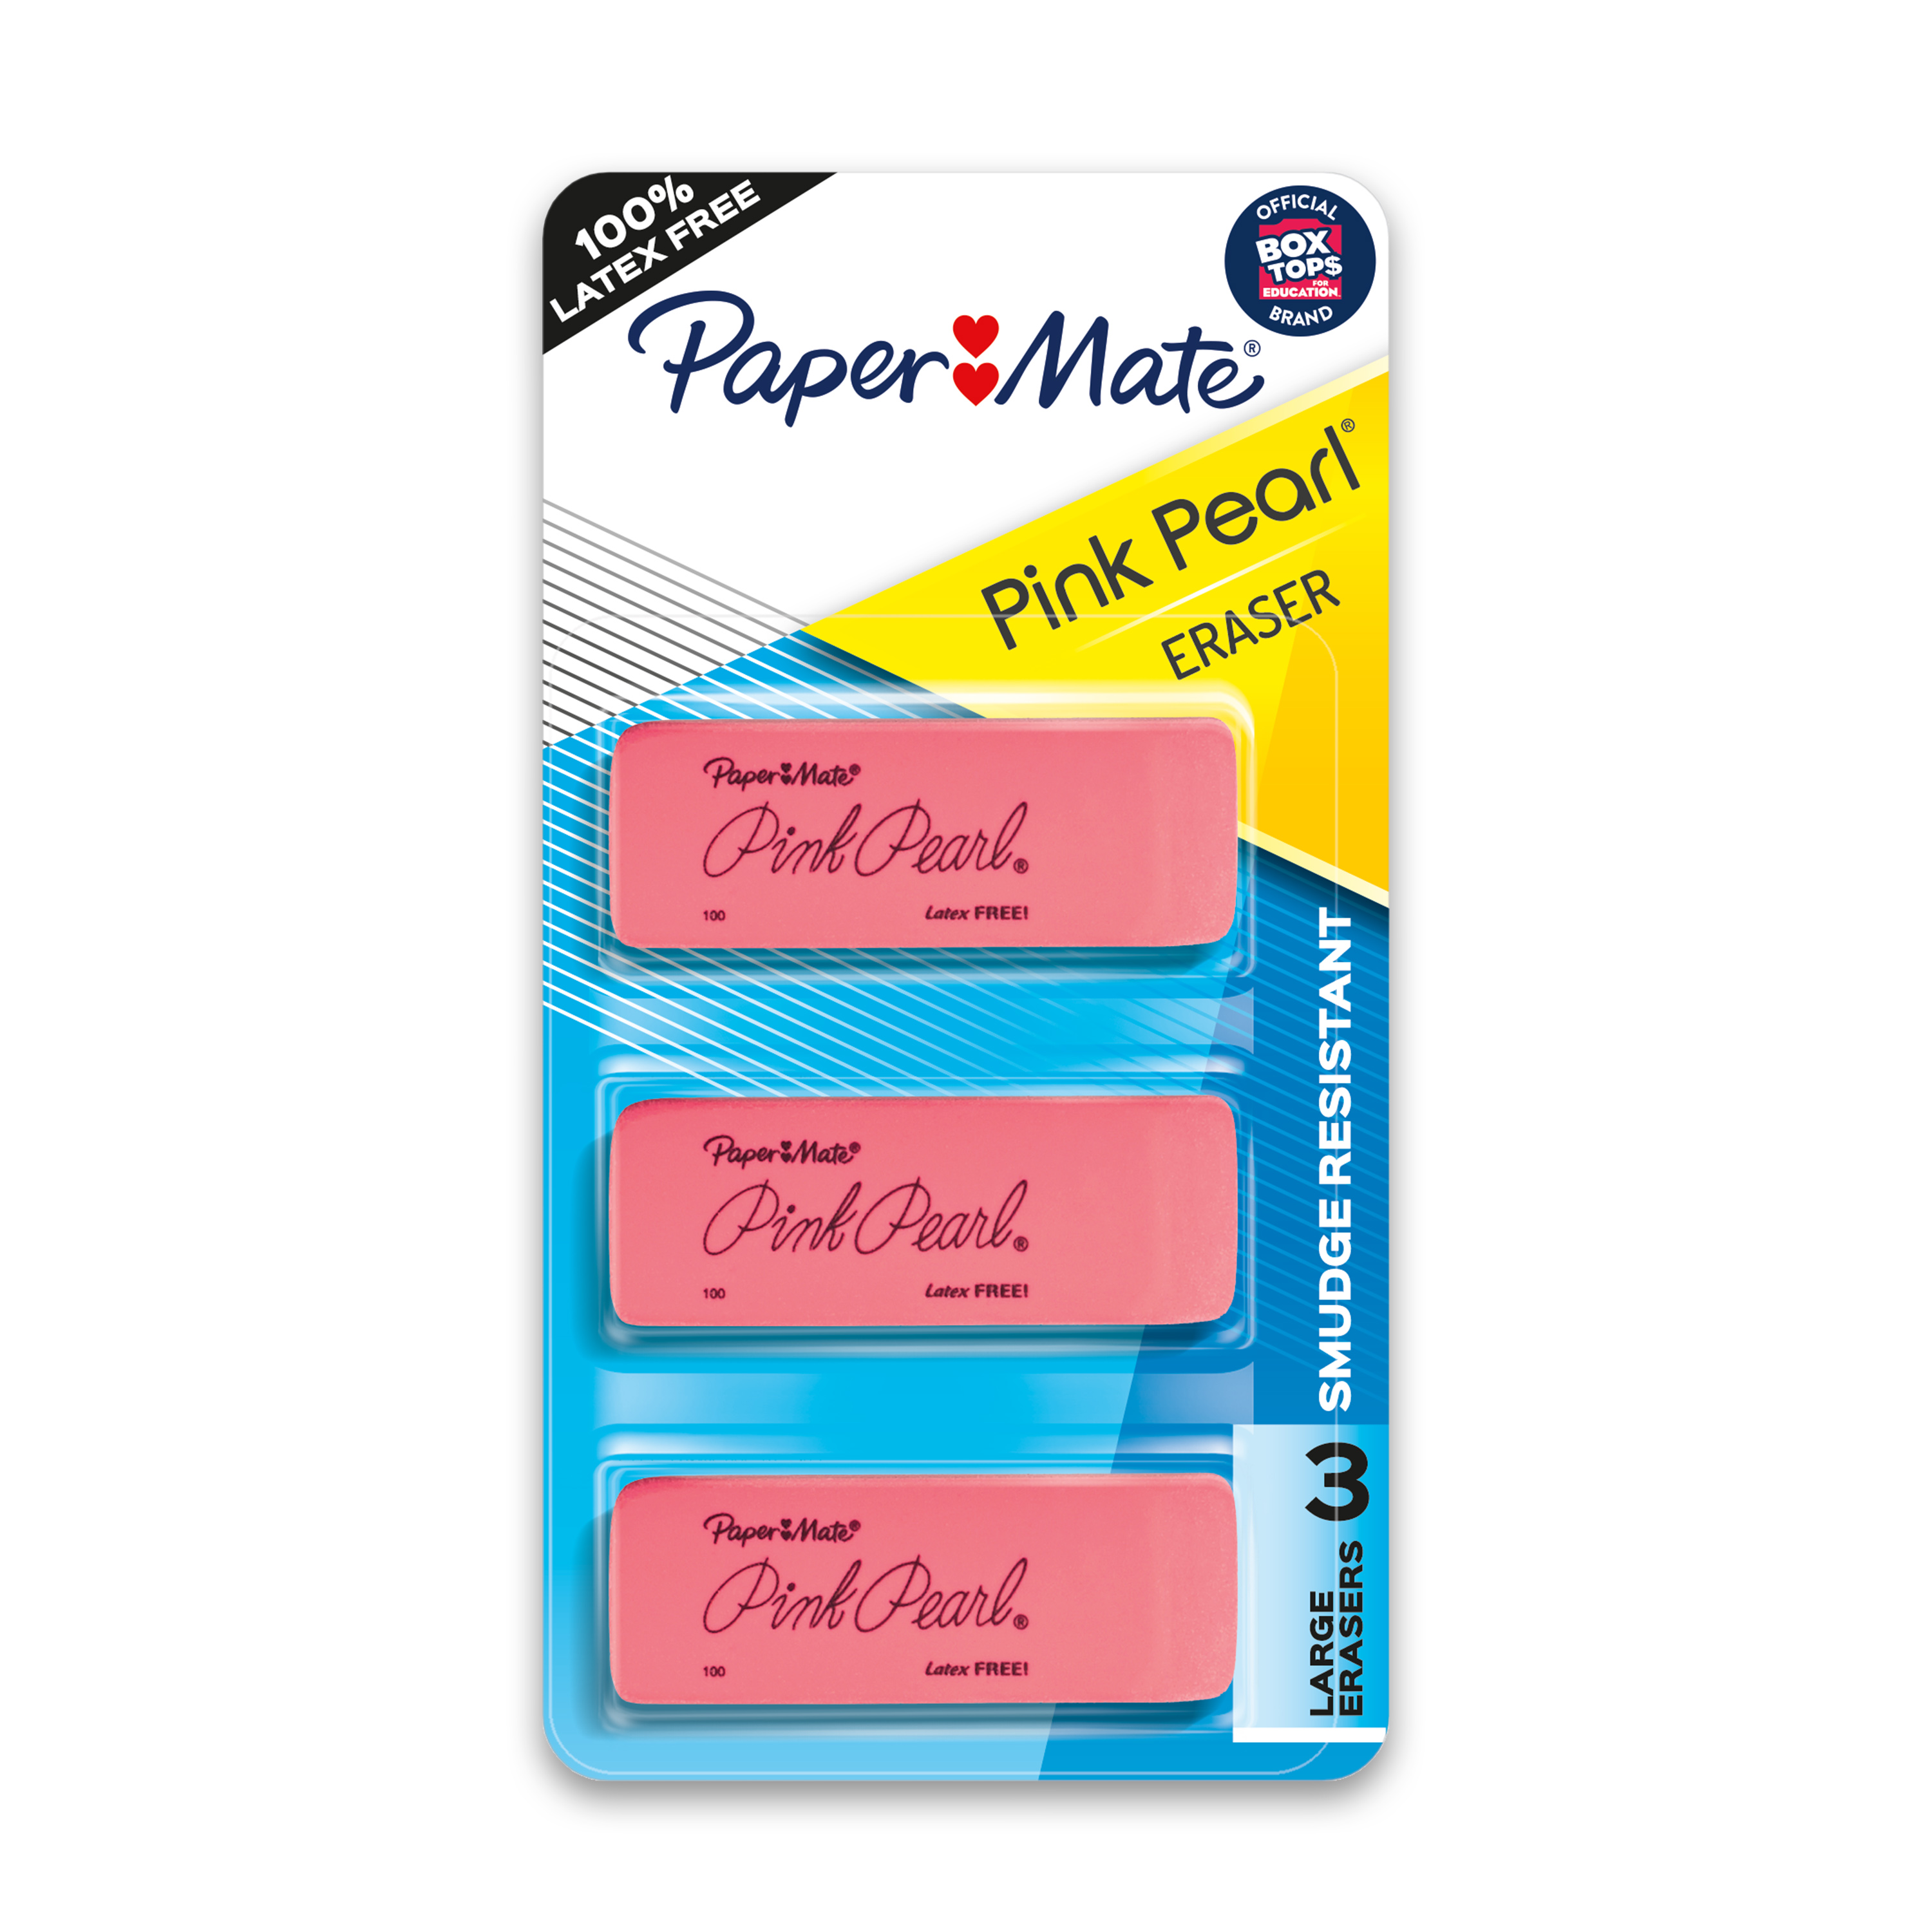 Paper Mate Pink Pearl Erasers, Large, 3 Count - image 1 of 6